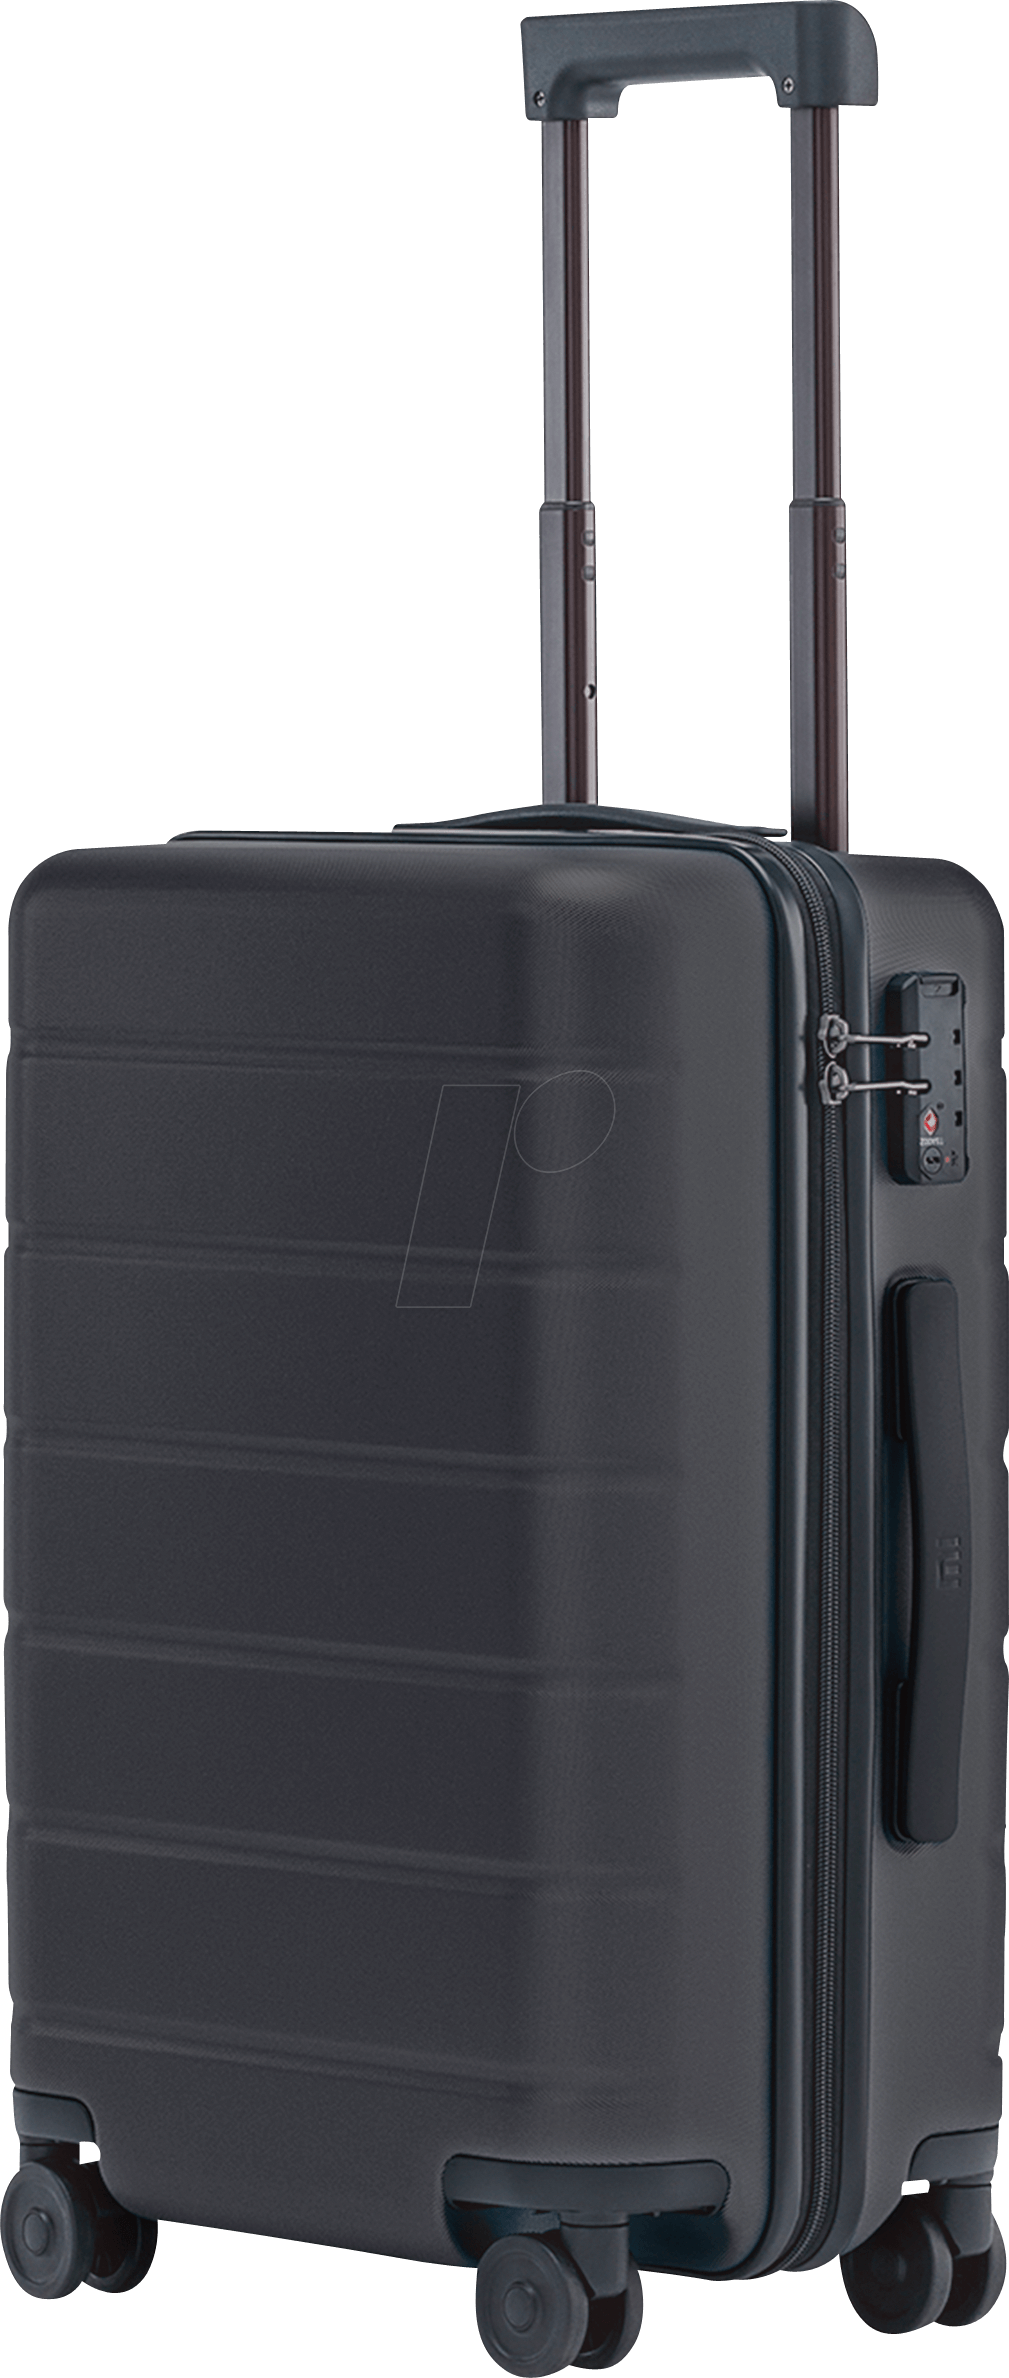 Hard Shell Suitcase With Lock Discount, 53% OFF | andreamotis.com